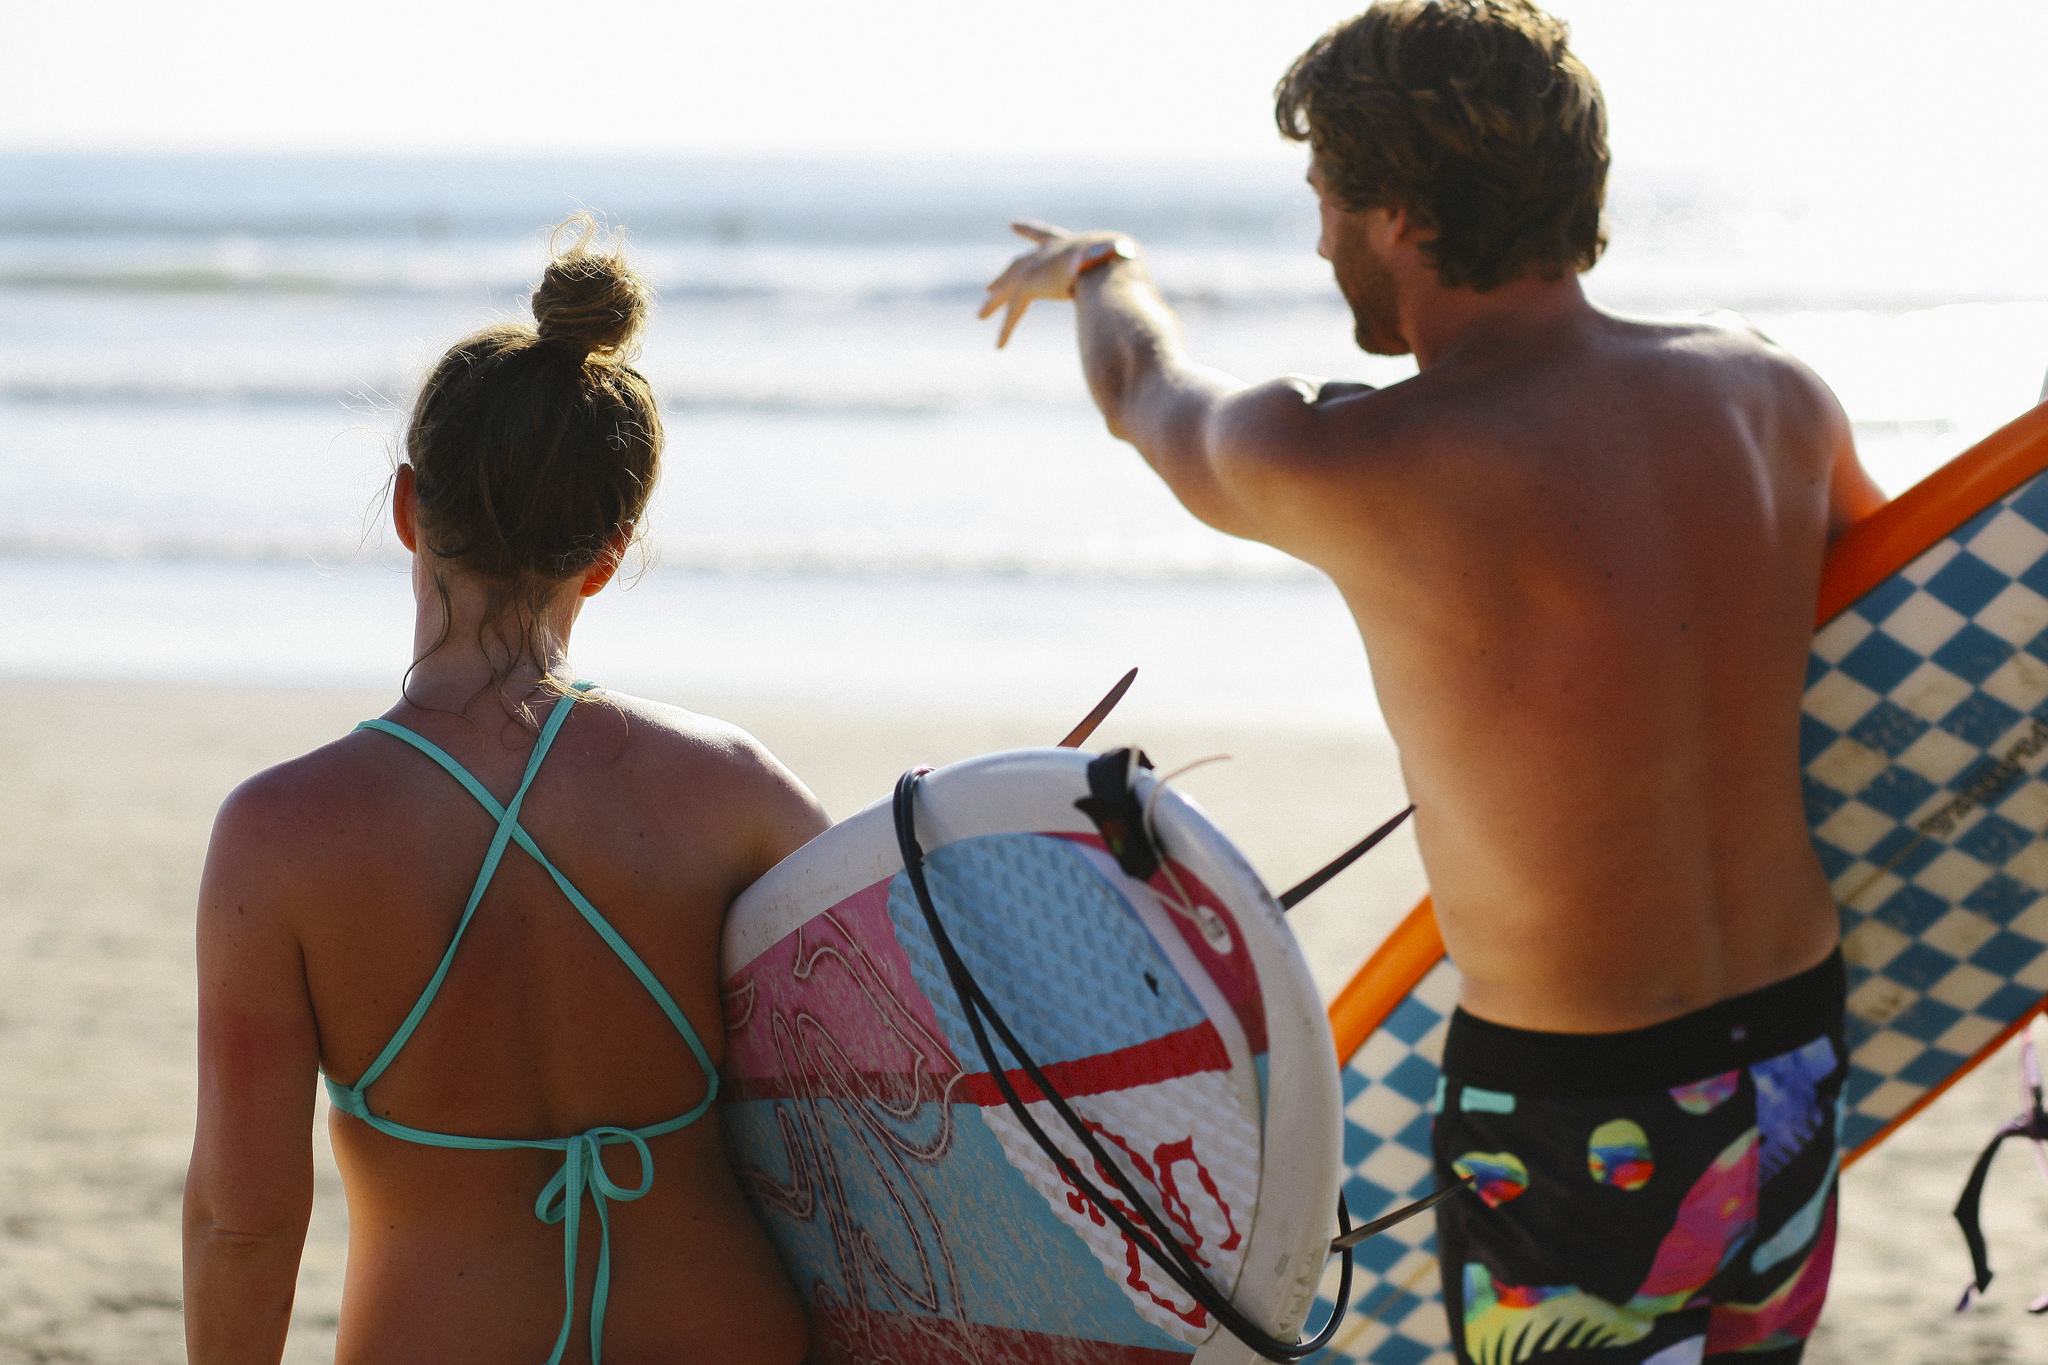 Experienced surf coaches